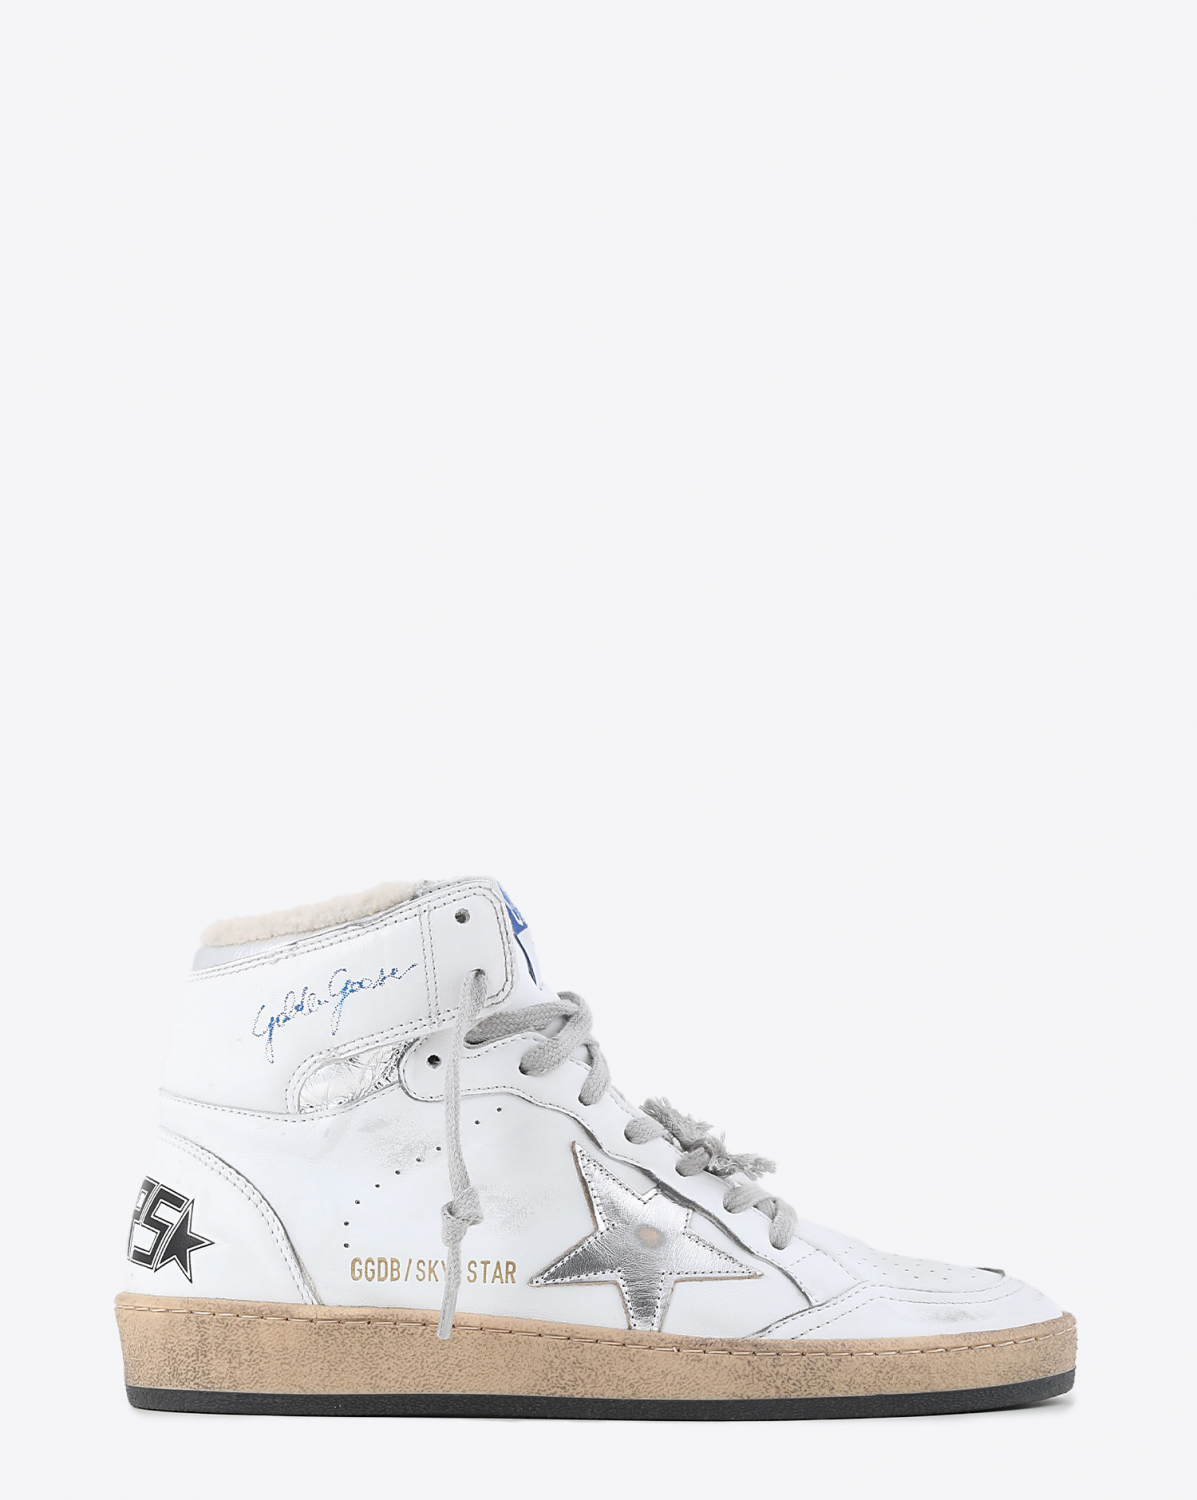 Sneakers Golden Goose Woman Permanent Sky Star Shearling White Silver 80185